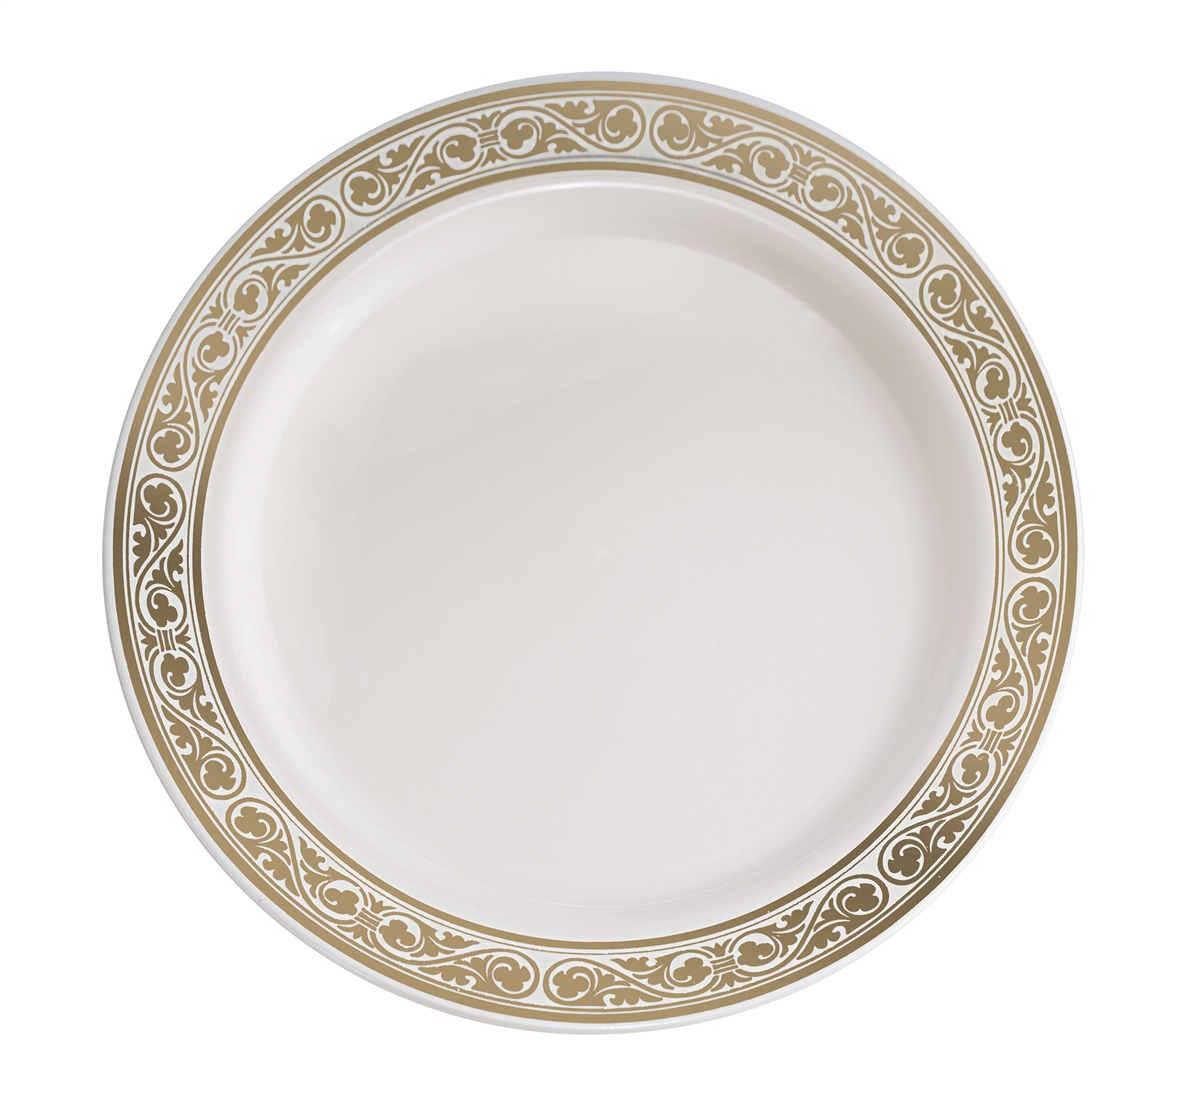 Royalty High End Plastic Plates - Ivory/Gold 10 Count